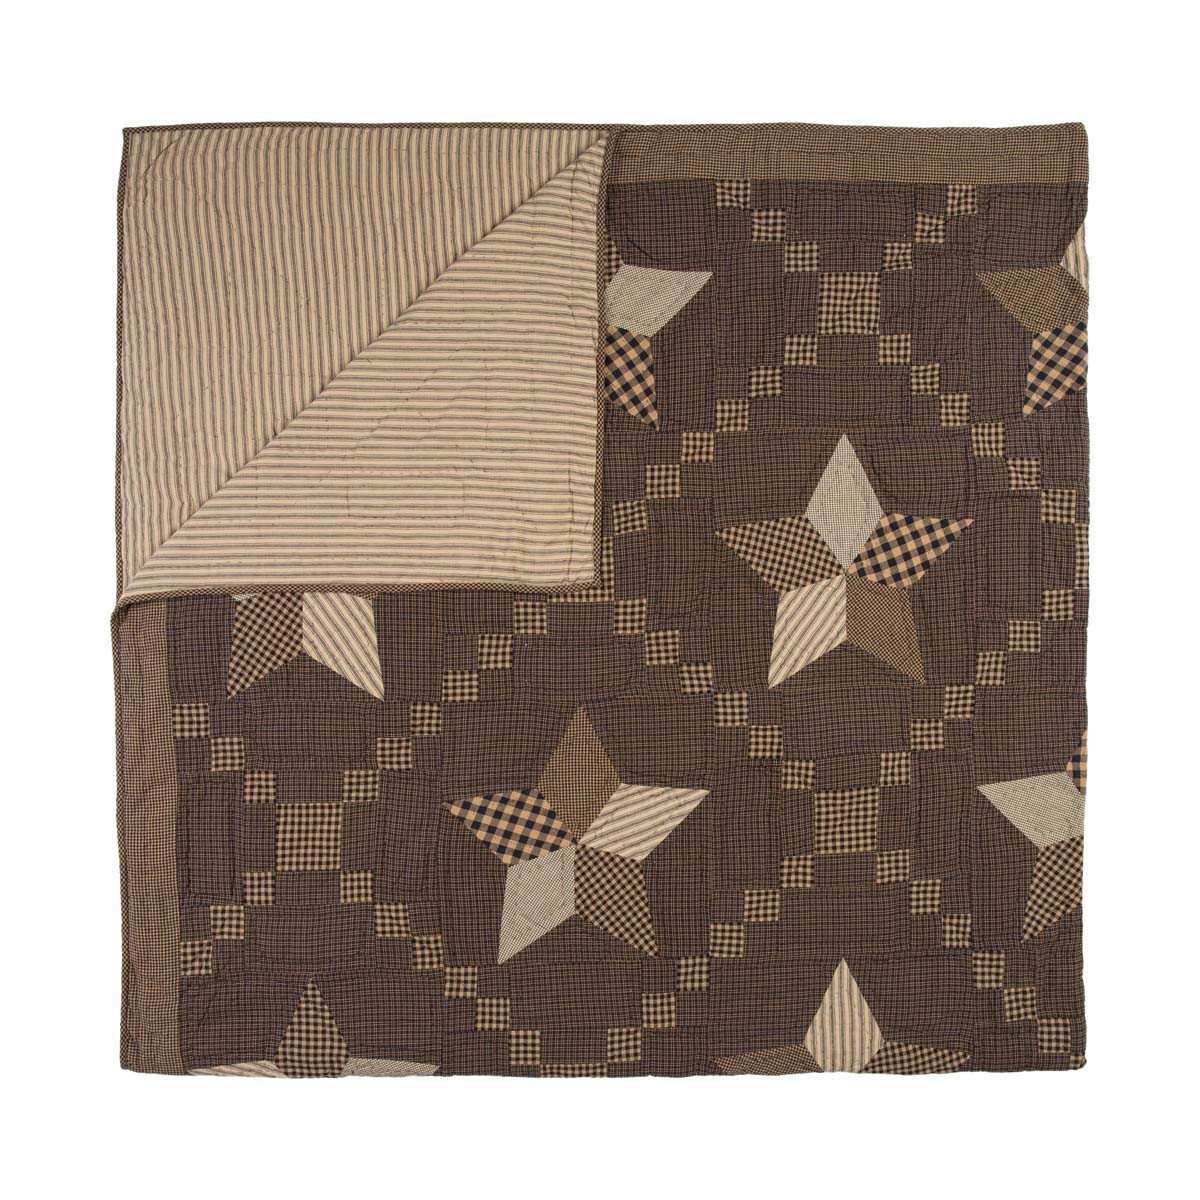 Farmhouse Star Luxury King Quilt 120Wx105L VHC Brands folded